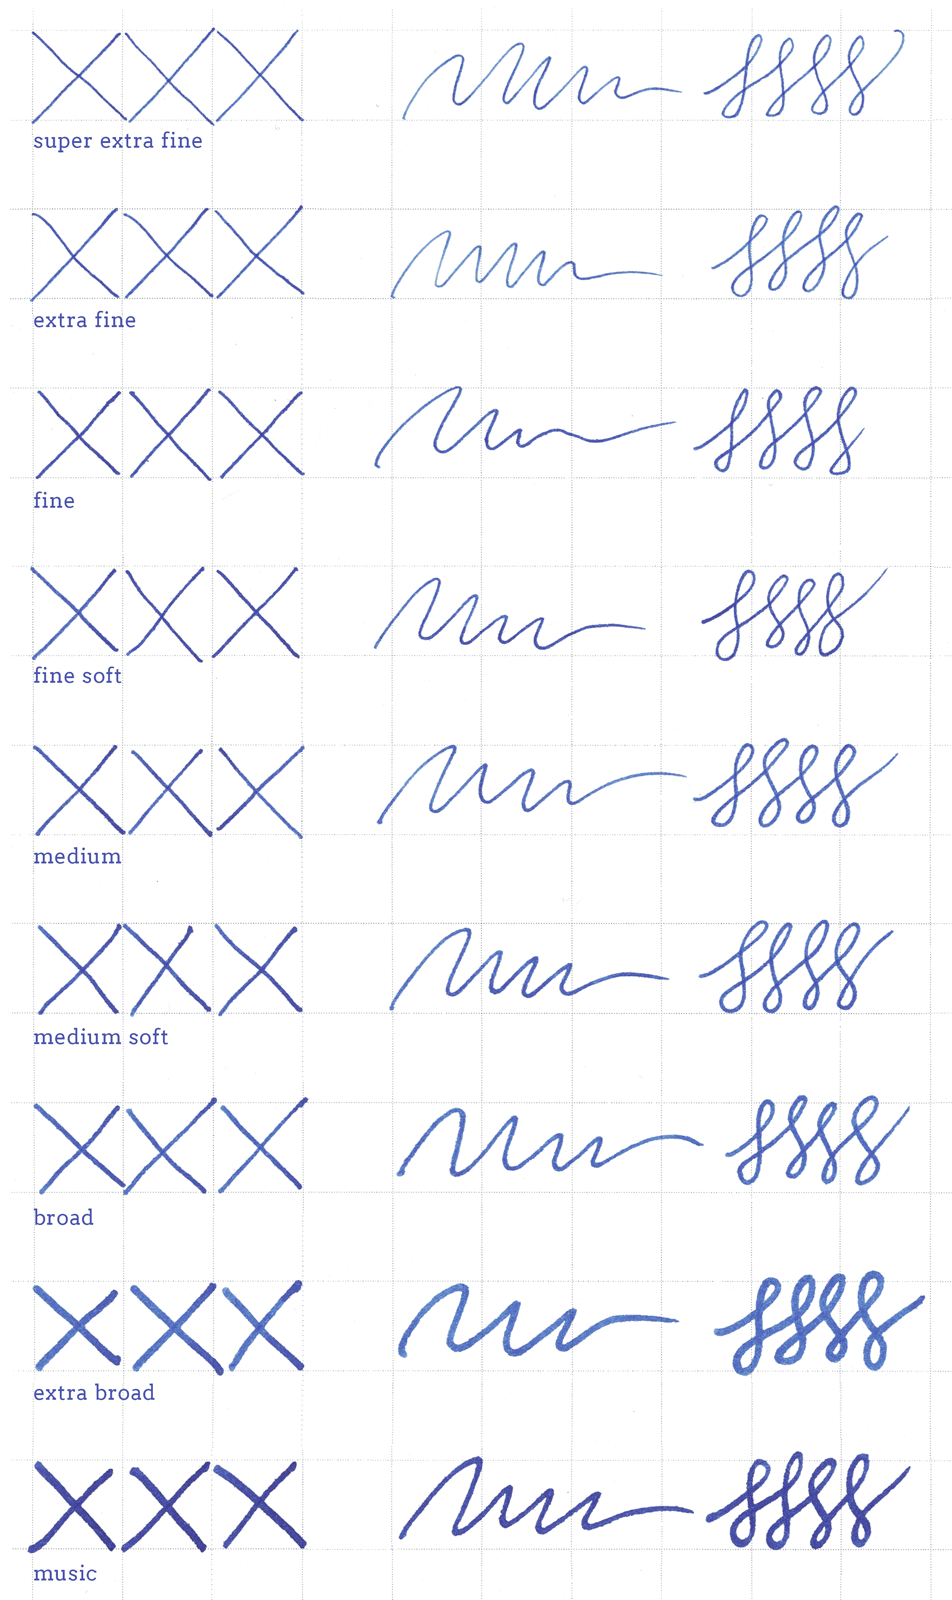 Comparison of writing samples with different nib sizes